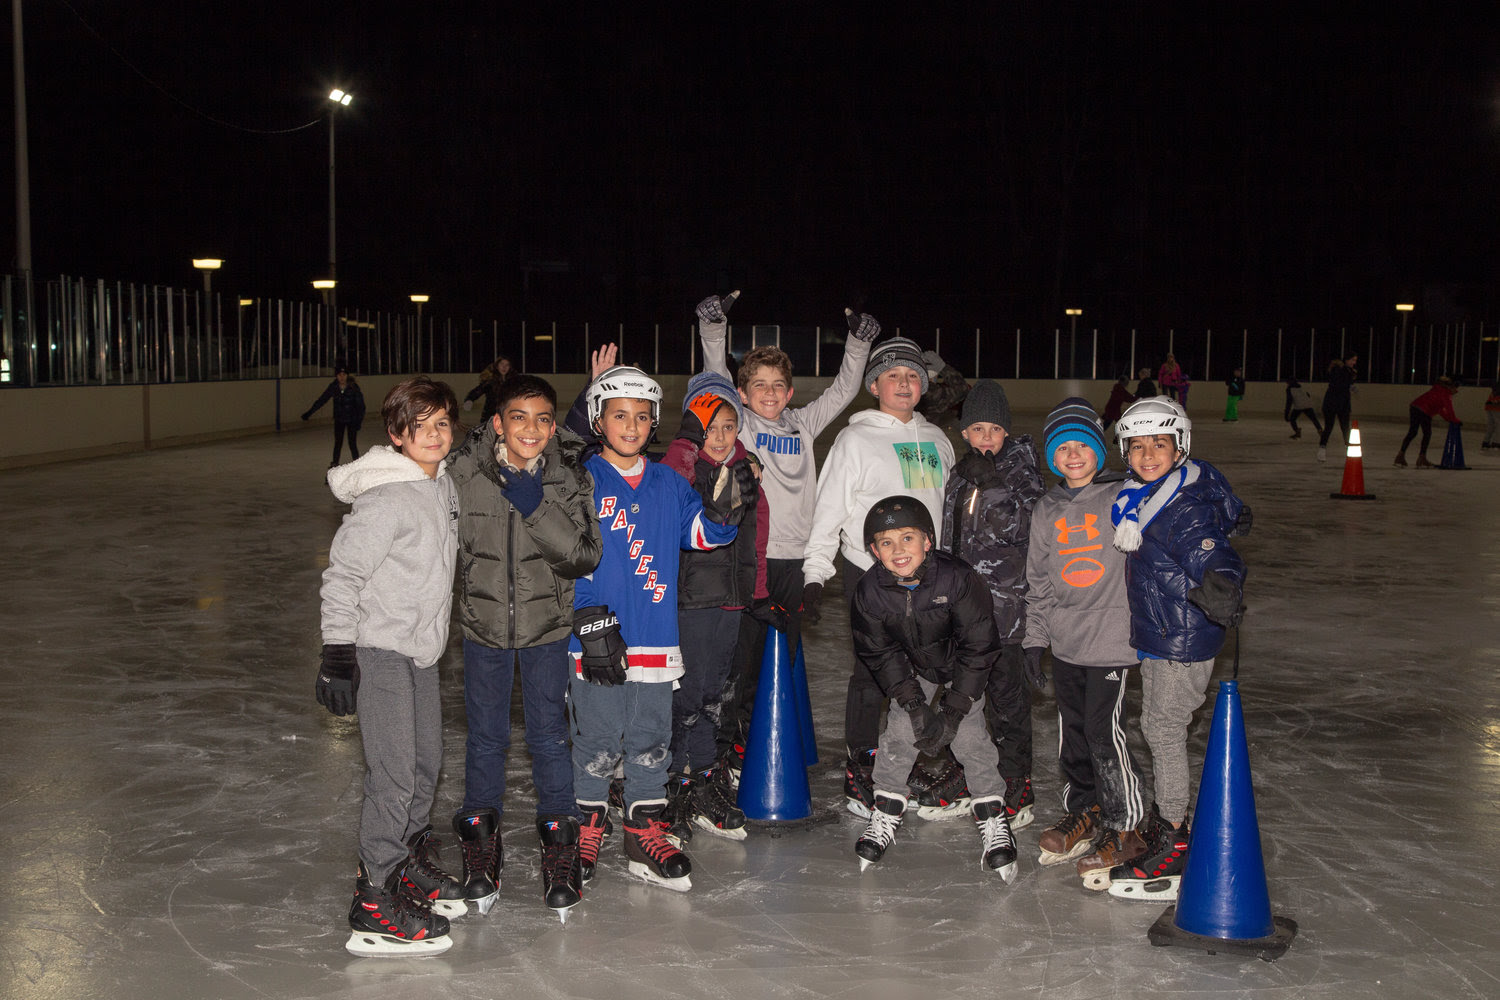 On the Grant Park ice rink at the Chabad of Hewlett’s Hanukkah on Ice from left Johnathan, Tomir, Nathan, Roy, Justin, Orr, Shaan, Stefano, Ari and Merrick.